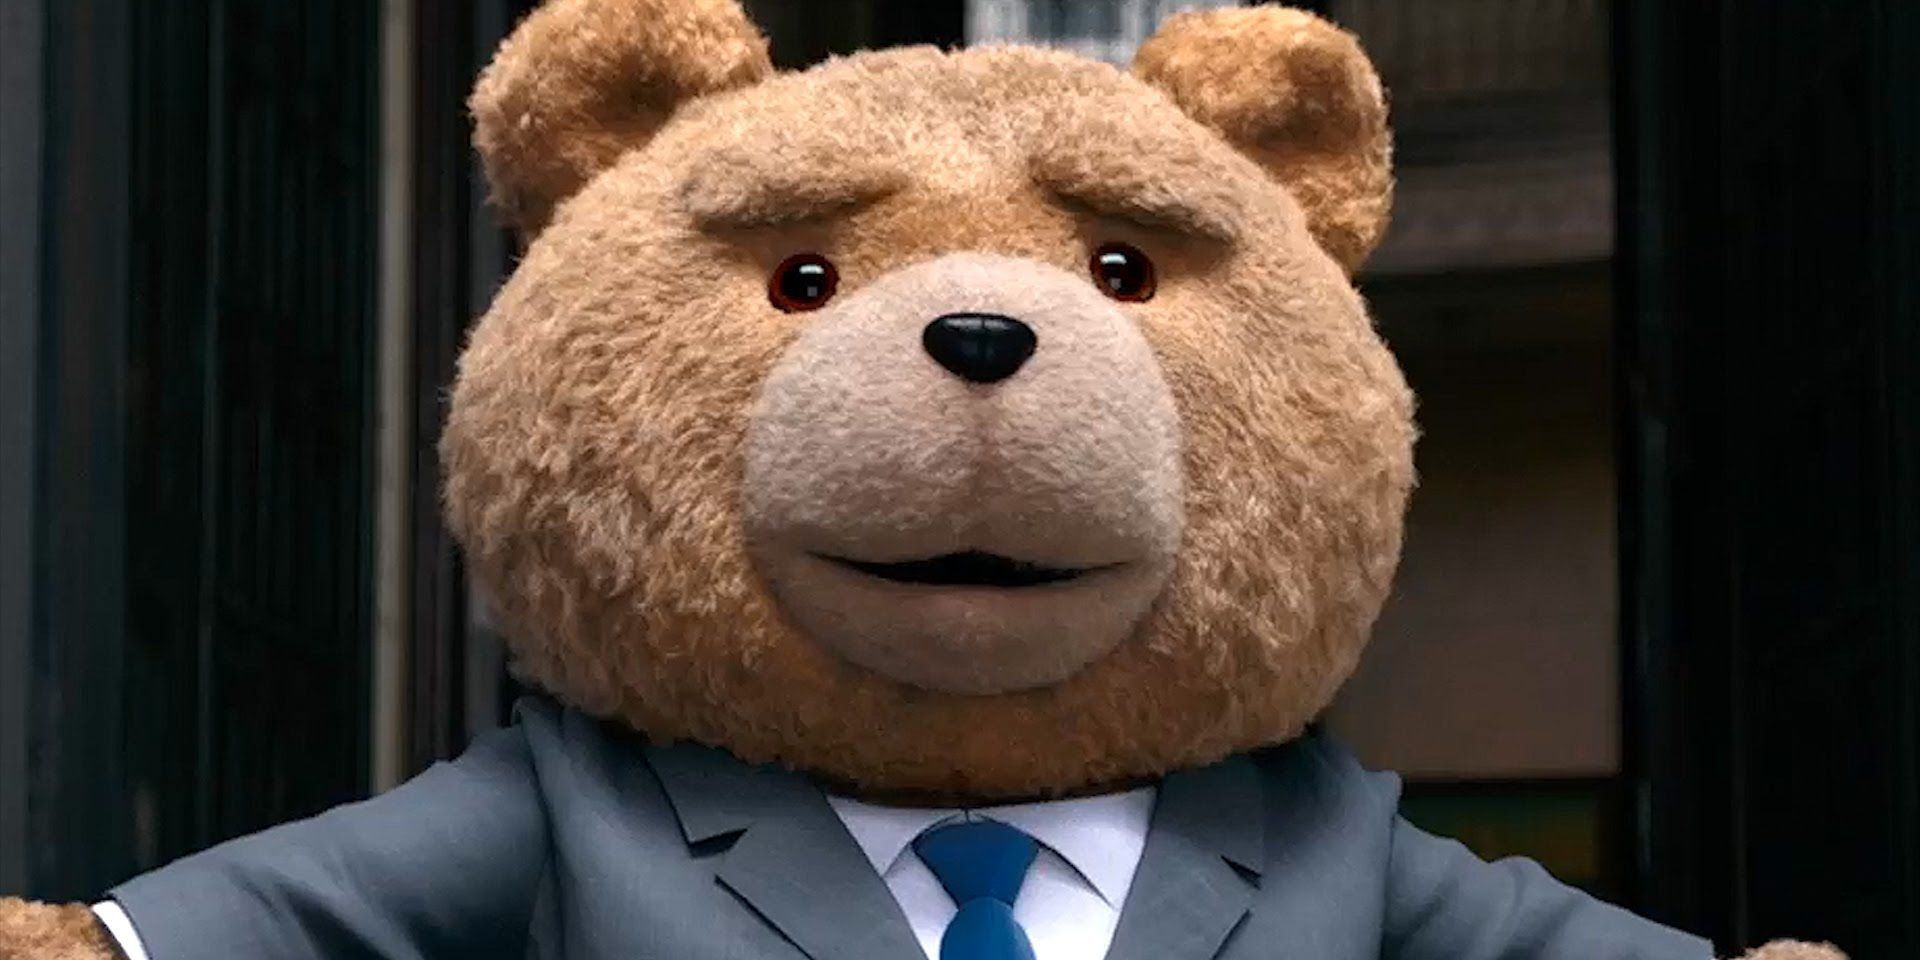 Ted in a suit in Ted 2